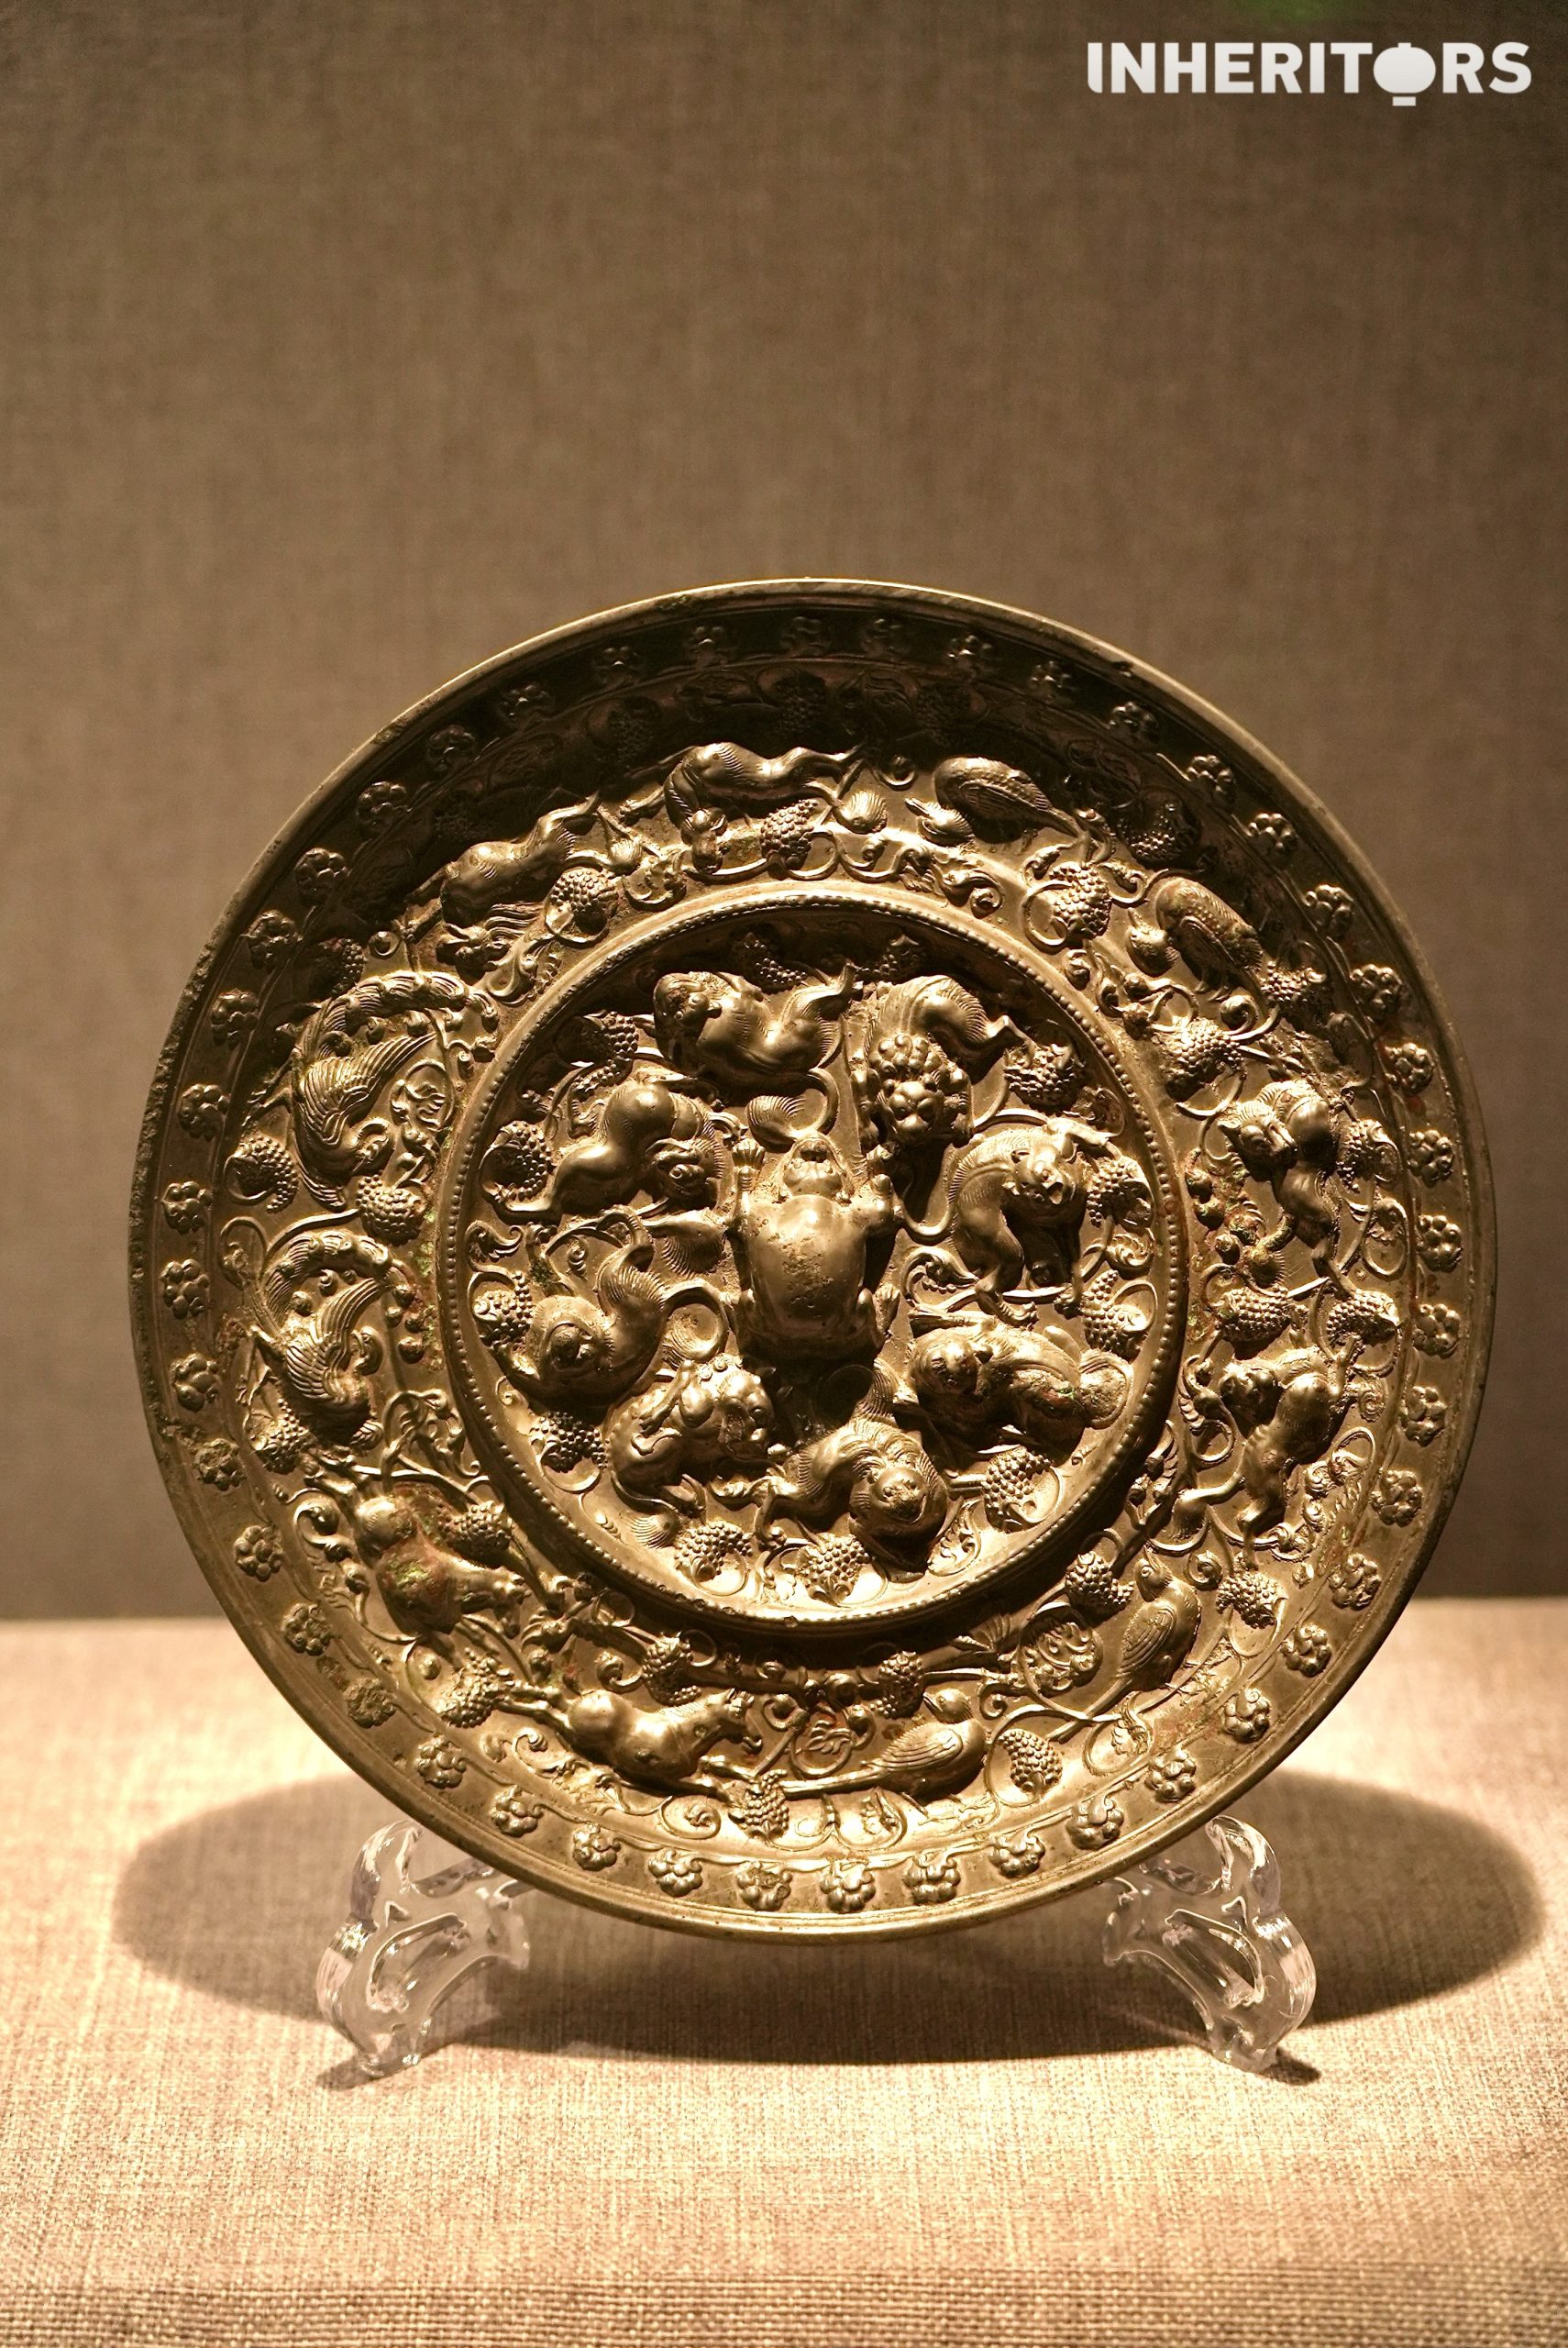 Bronze hand mirrors reflect Tang Dynasty values